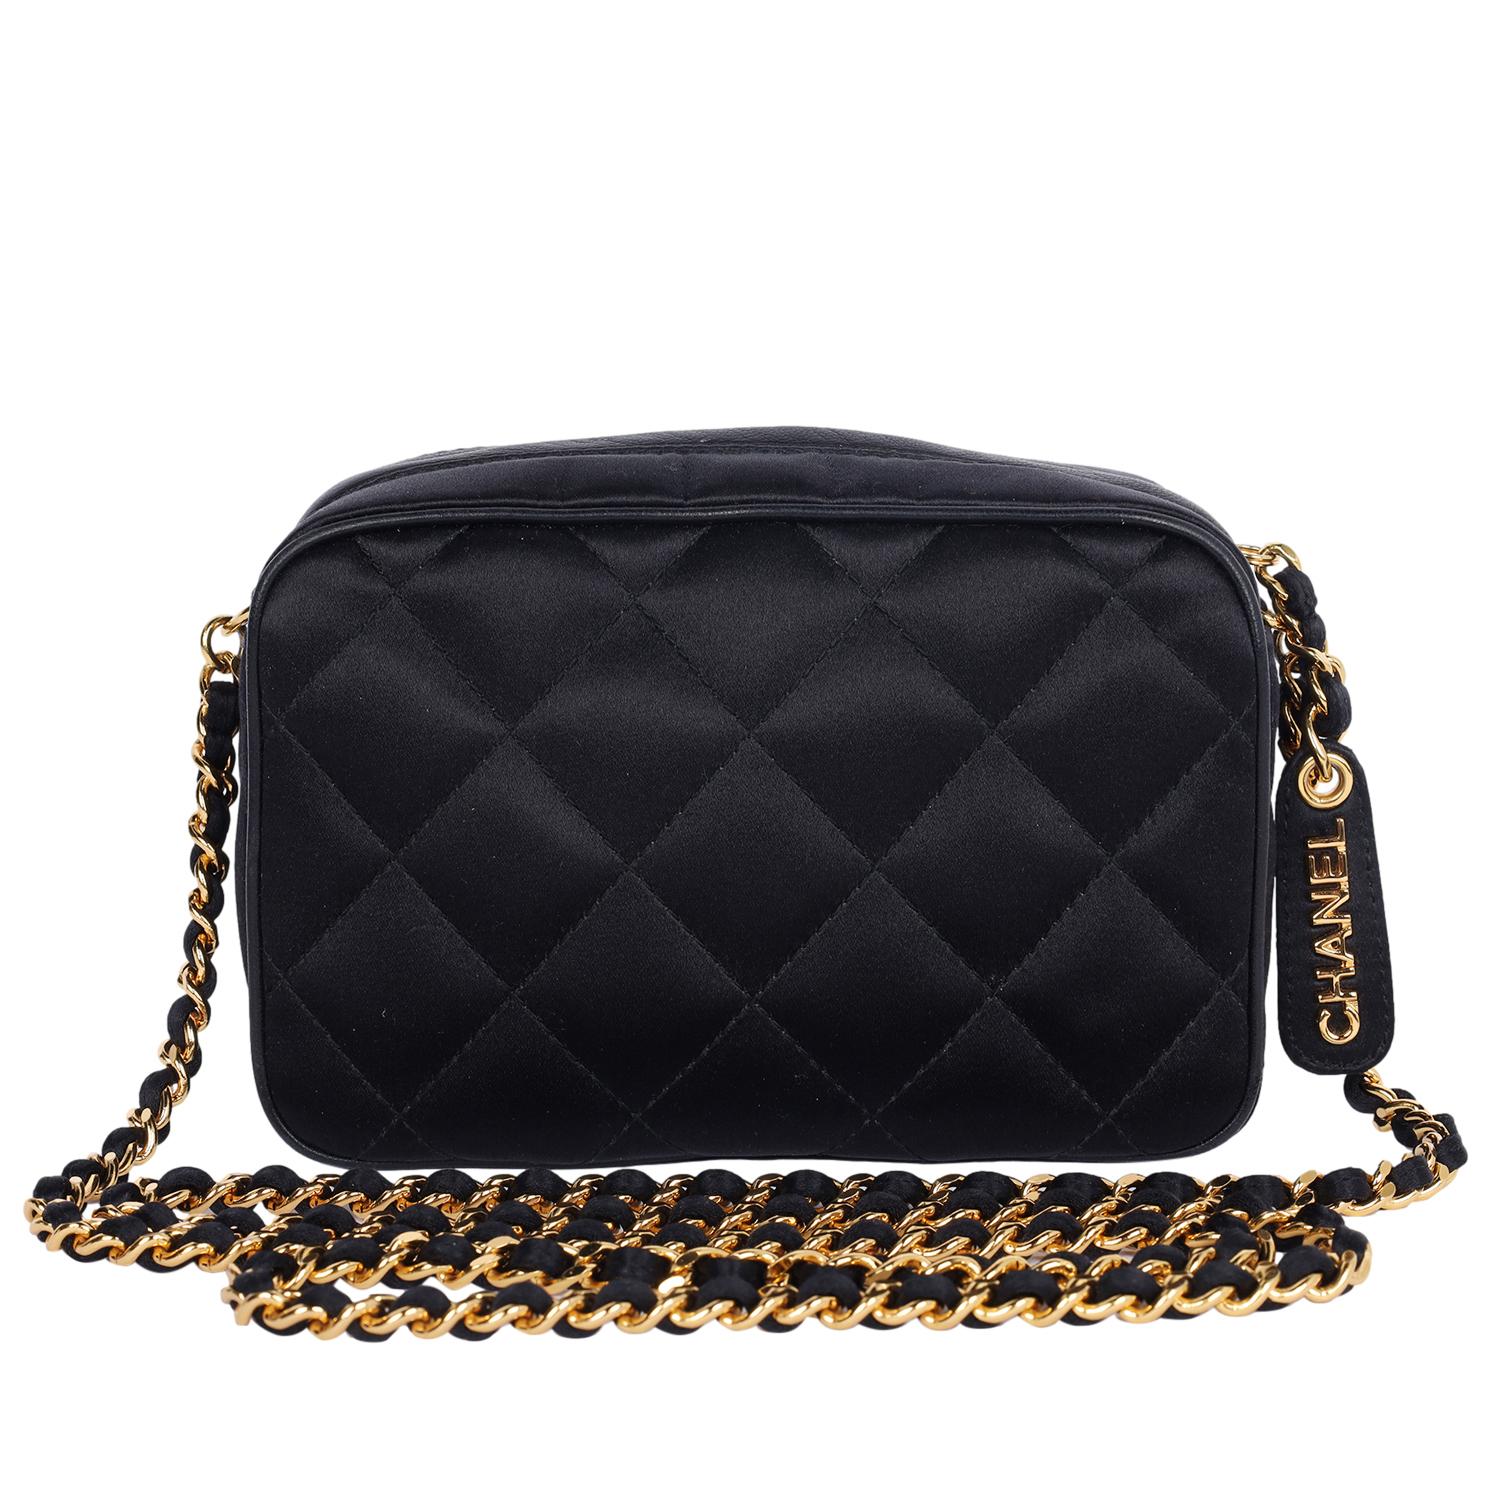 Chanel Mini Satin Leather Quilted Camera Cross Body Bag 1996 For Sale 3